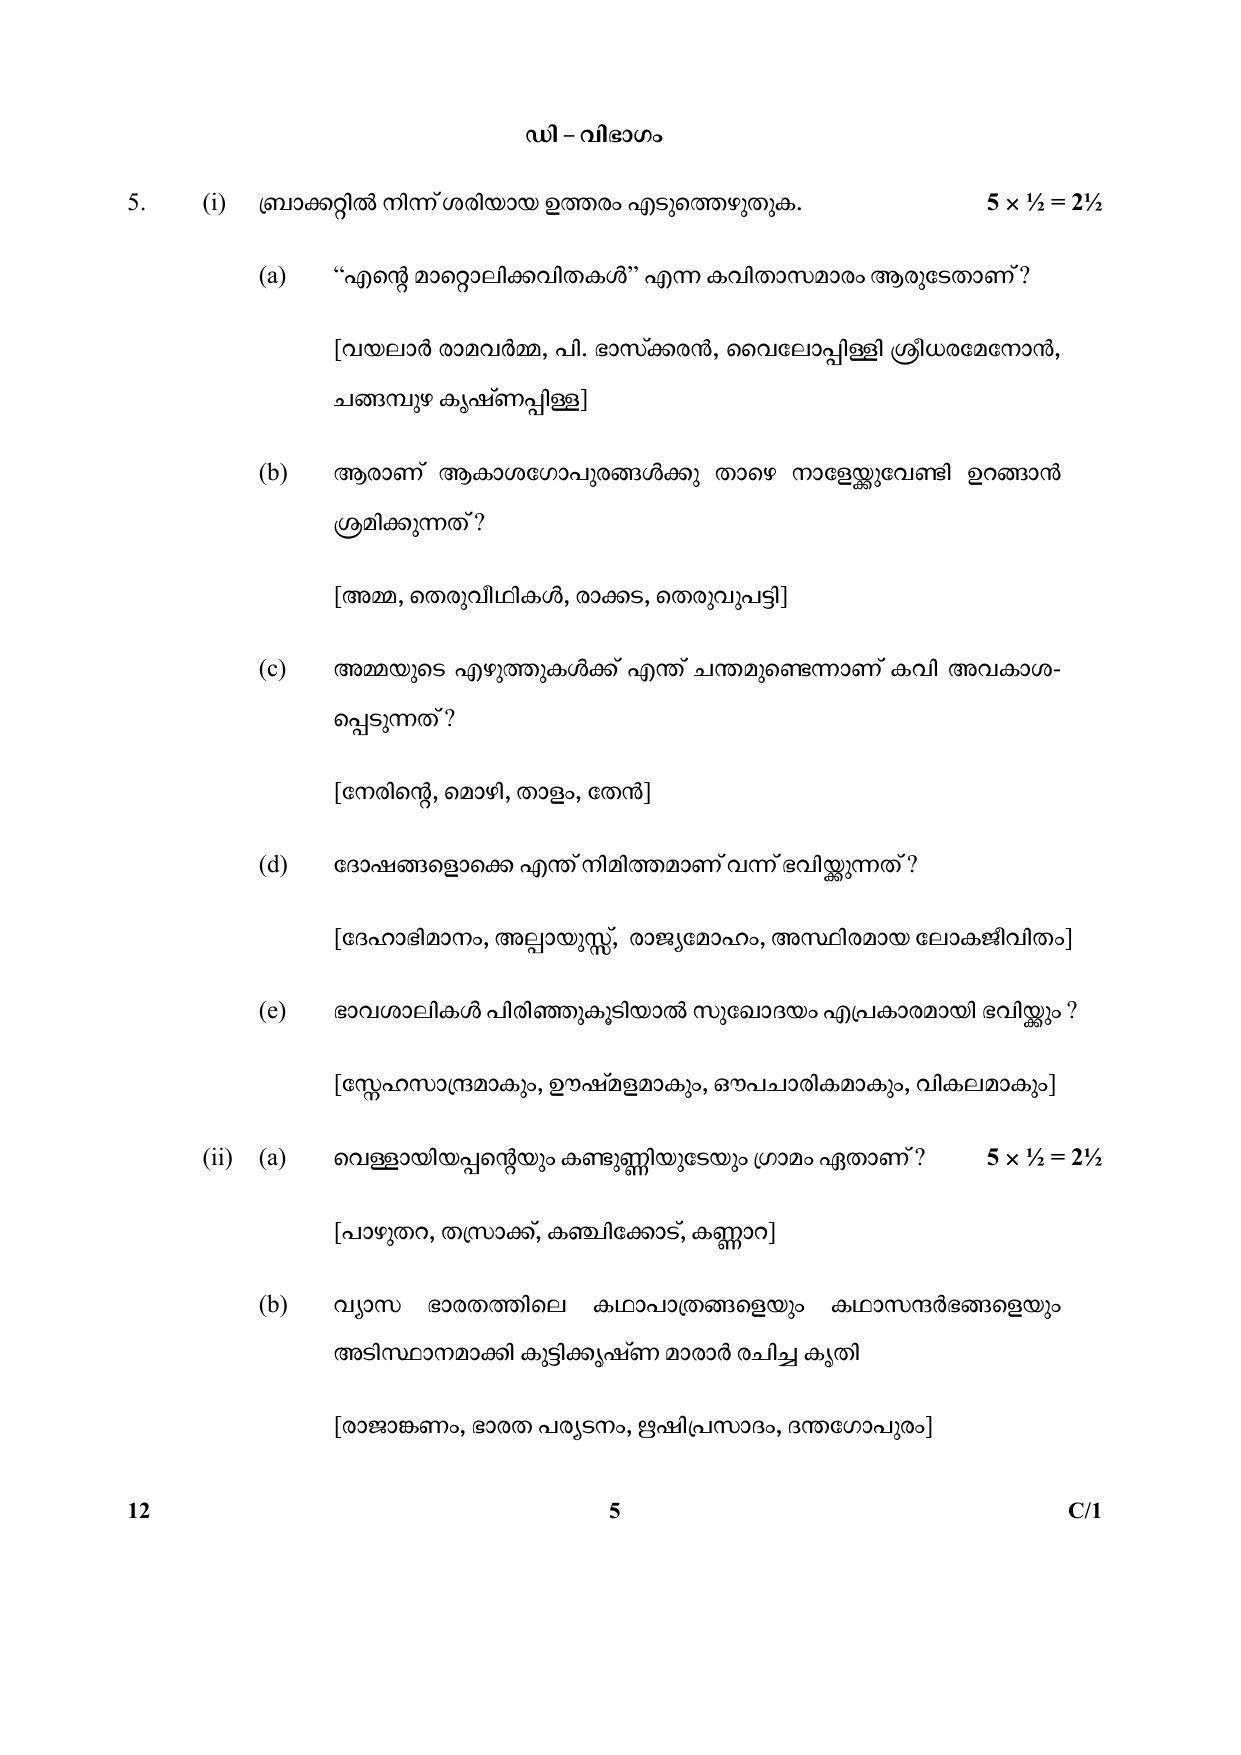 CBSE Class 10 12 (Malayalam) 2018 Compartment Question Paper - Page 5